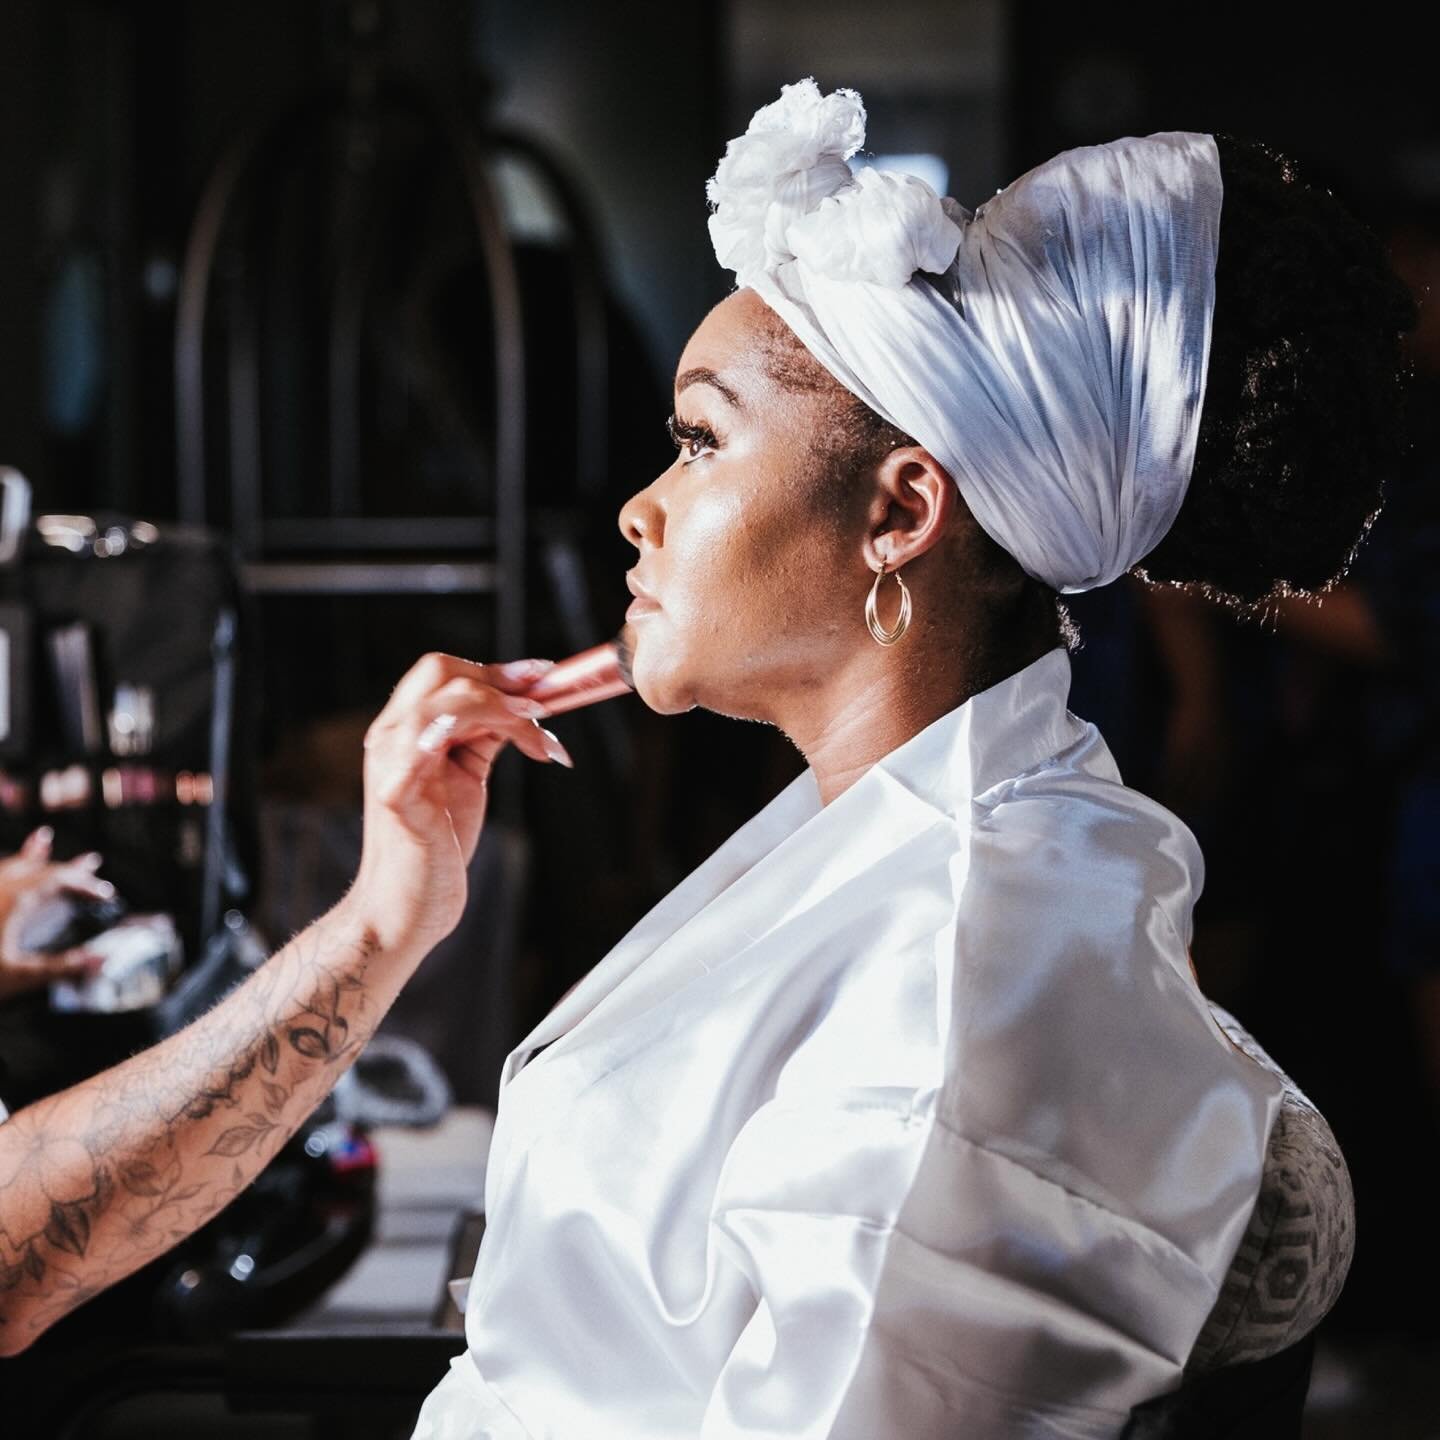 From makeup brushes to lace touches, every detail whispered secrets of her big day. 💍✨ 

#BridalPrep #BehindTheScenes #BrideToBe #WeddingPrep #BrideToBe #Providence #RhodeIsland #August2023